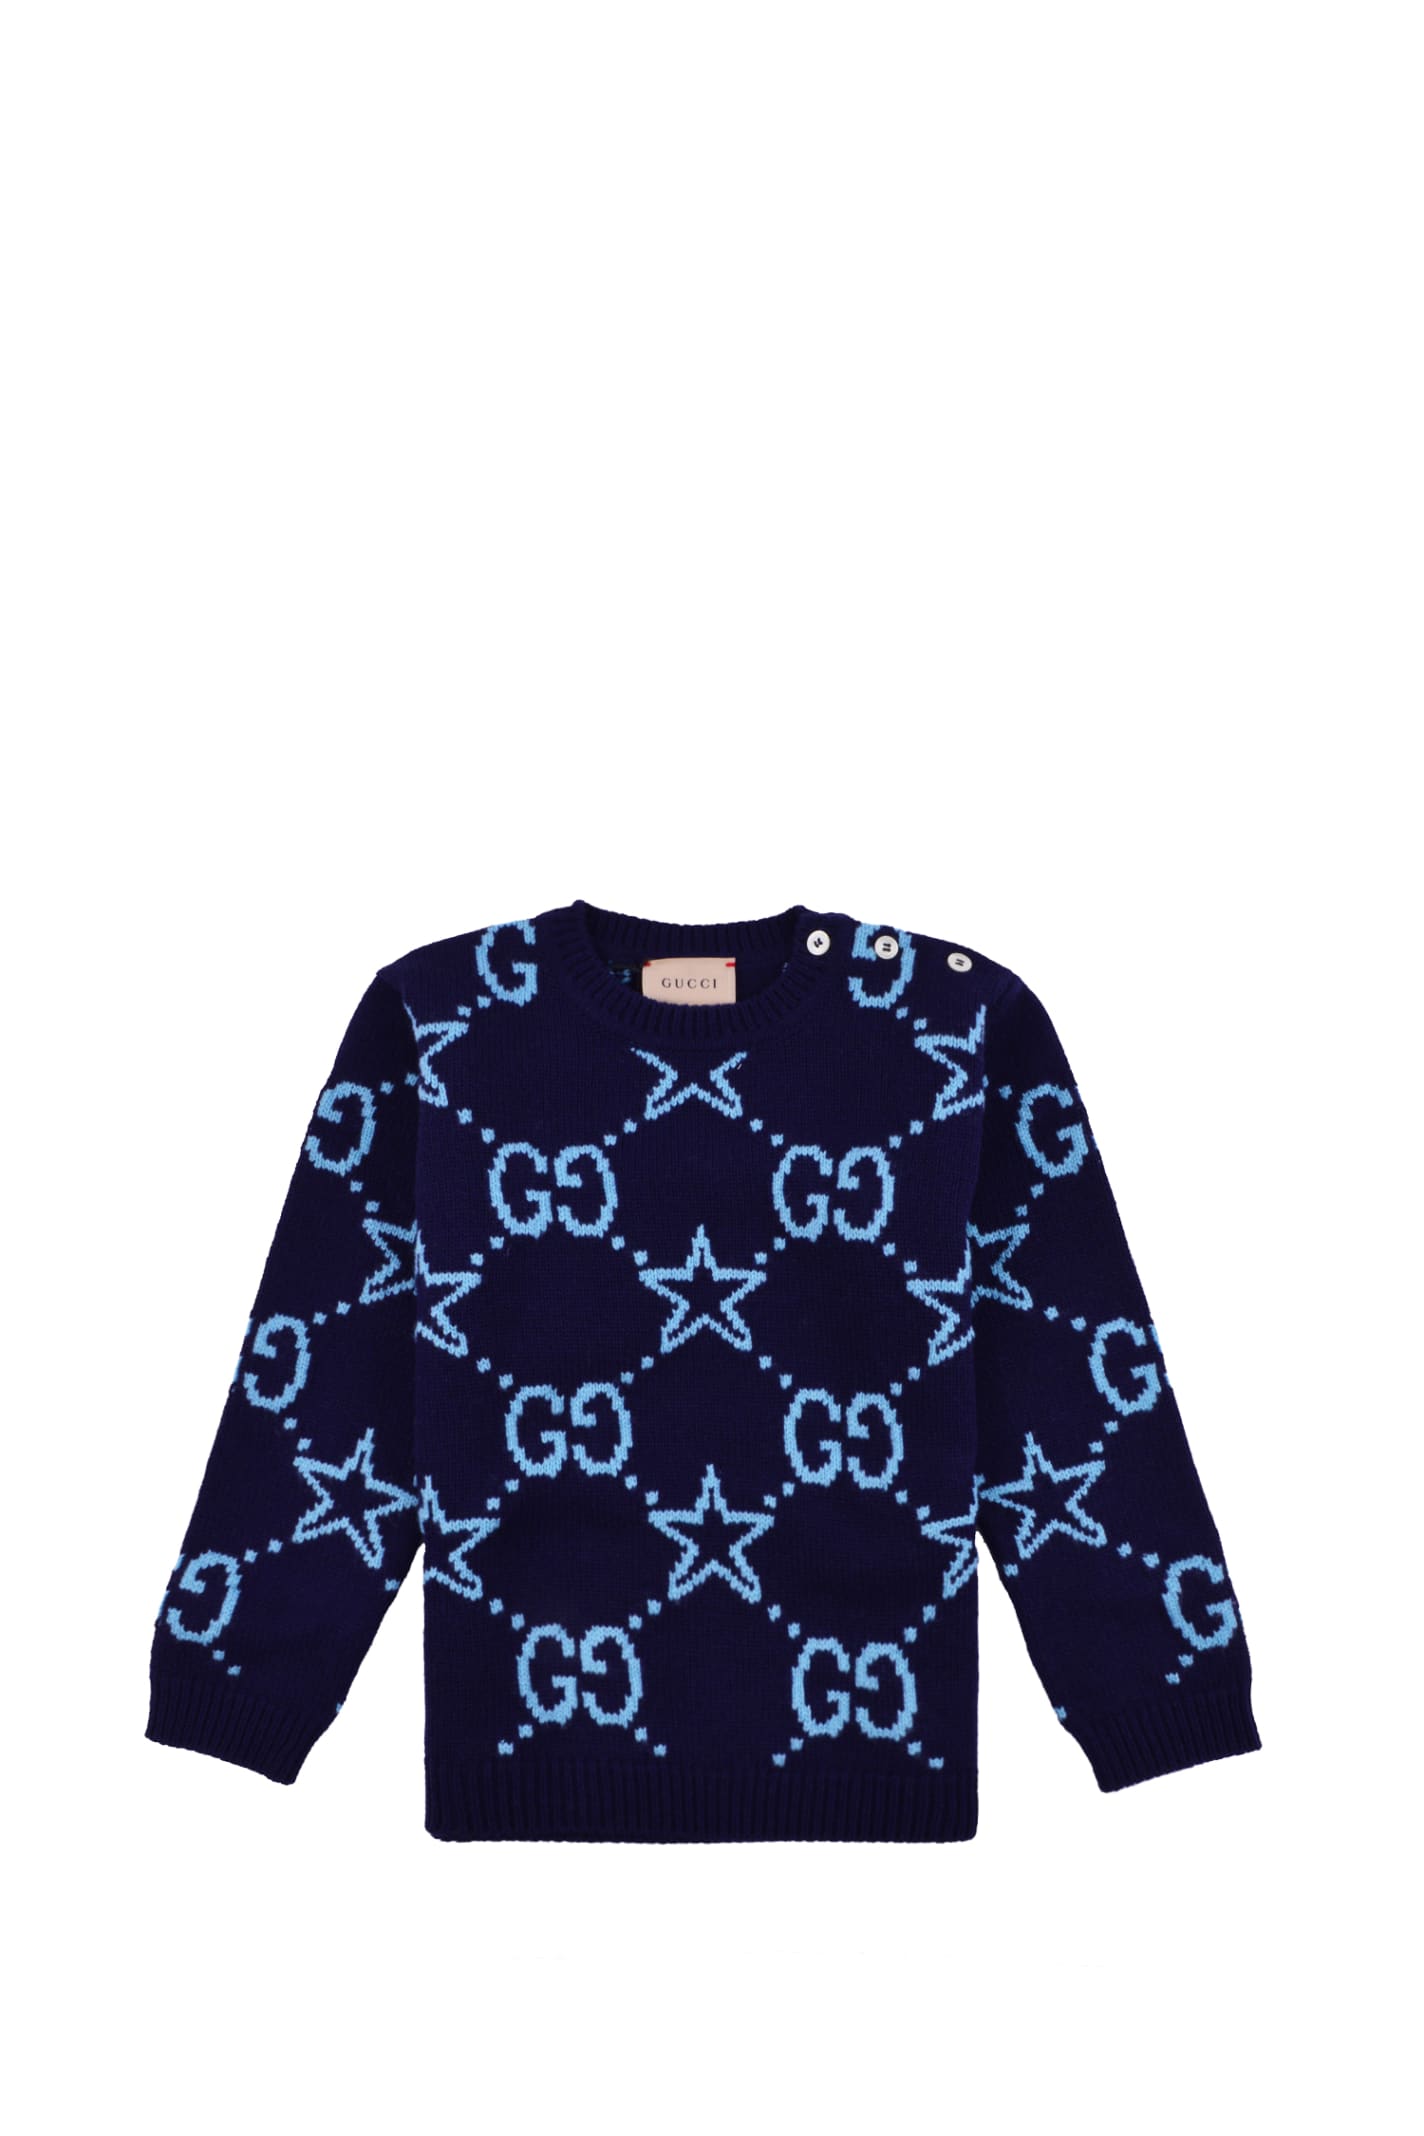 Gucci Embroidered Sweater With Gg And Stars